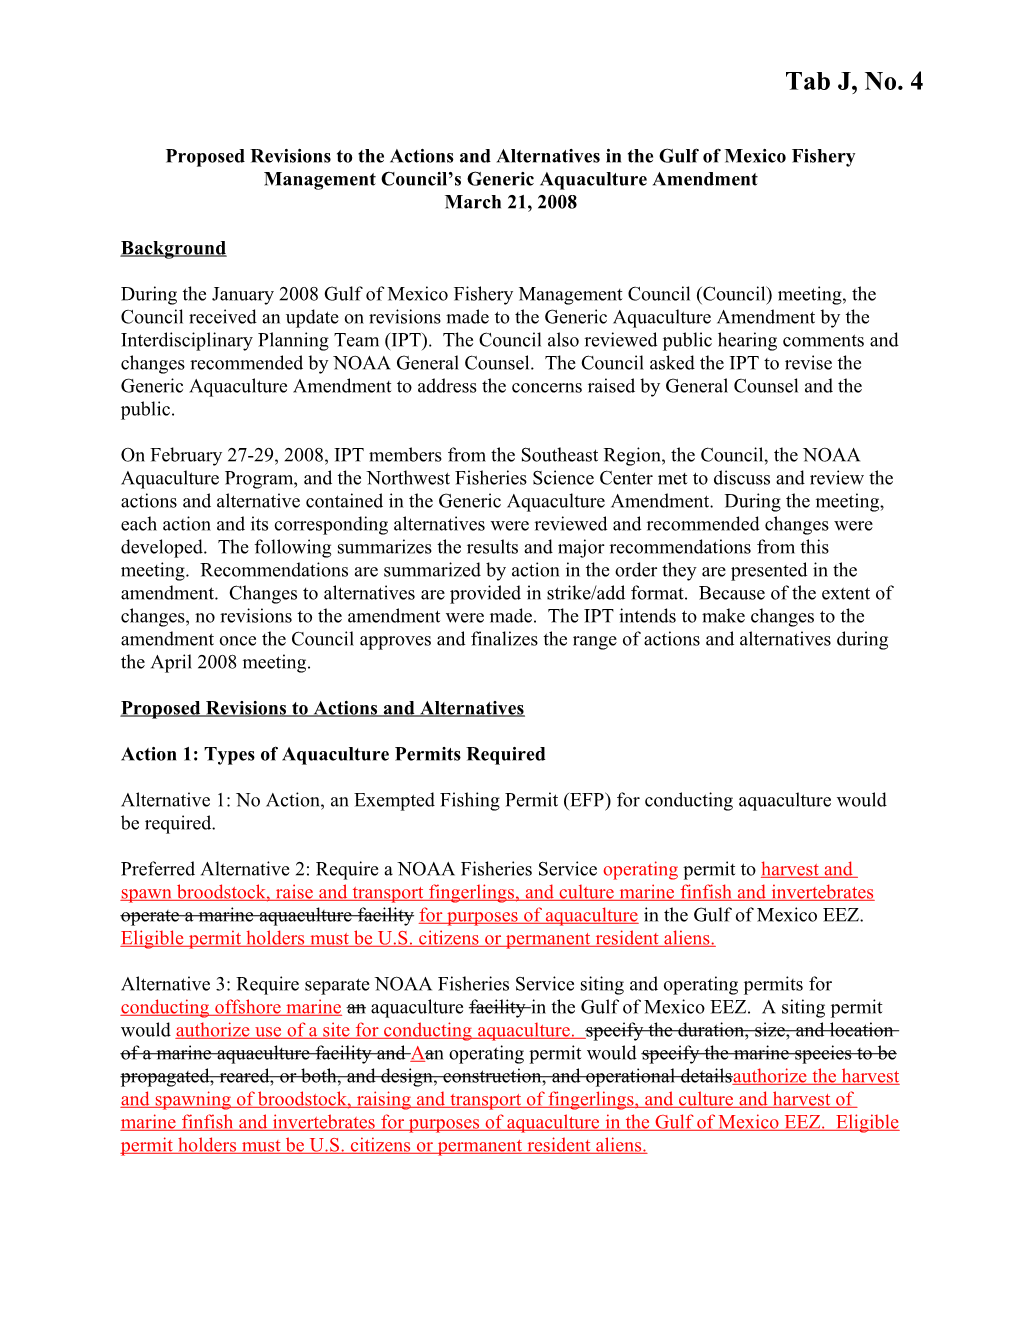 Proposed Revisions to the Actions and Alternatives in the Gulf of Mexico Fishery Management